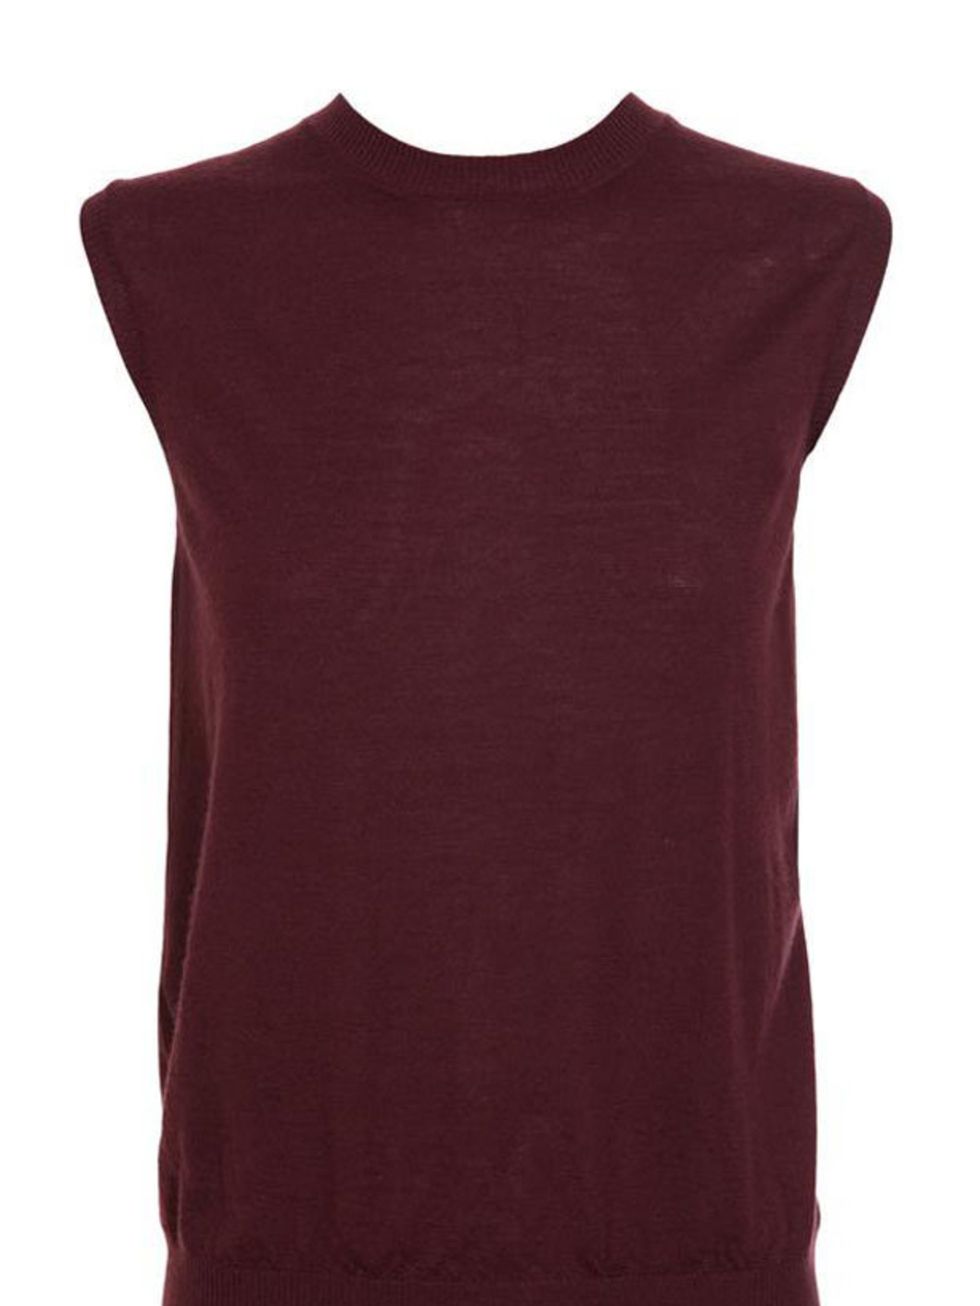 <p>Nina Ricci cashmere tank top, £470, at <a href="http://www.brownsfashion.com/Product/Women/Women/Clothing/Knitwear/Cashmere-silk_knit_tank_top/Product.aspx?p=3144834&amp;pc=1949756&amp;cl=4">Browns Fashion</a></p>